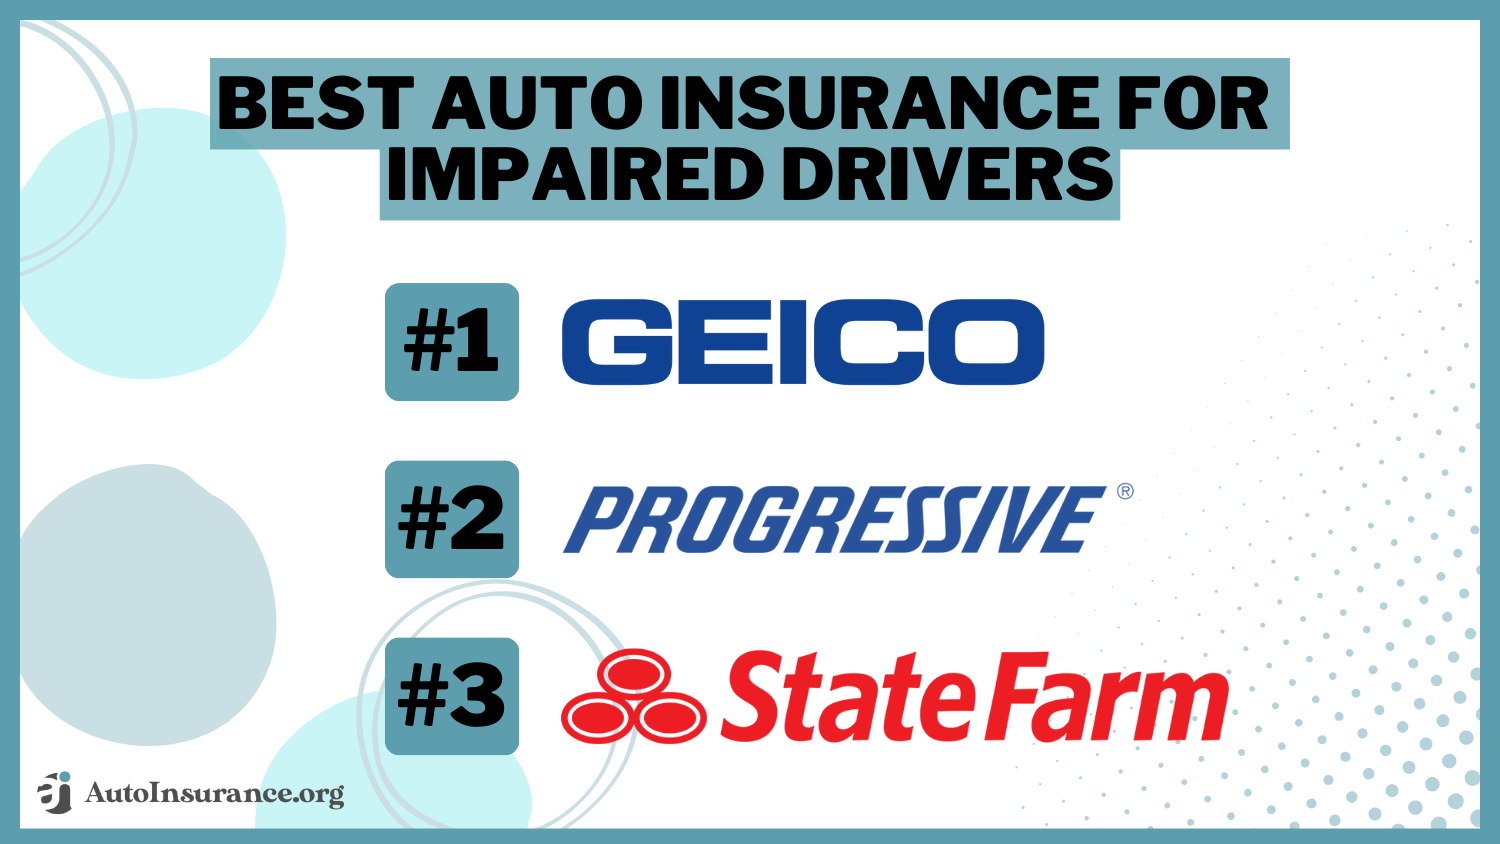 Best Auto Insurance for Impaired Drivers: Geico, Progressive, State Farm